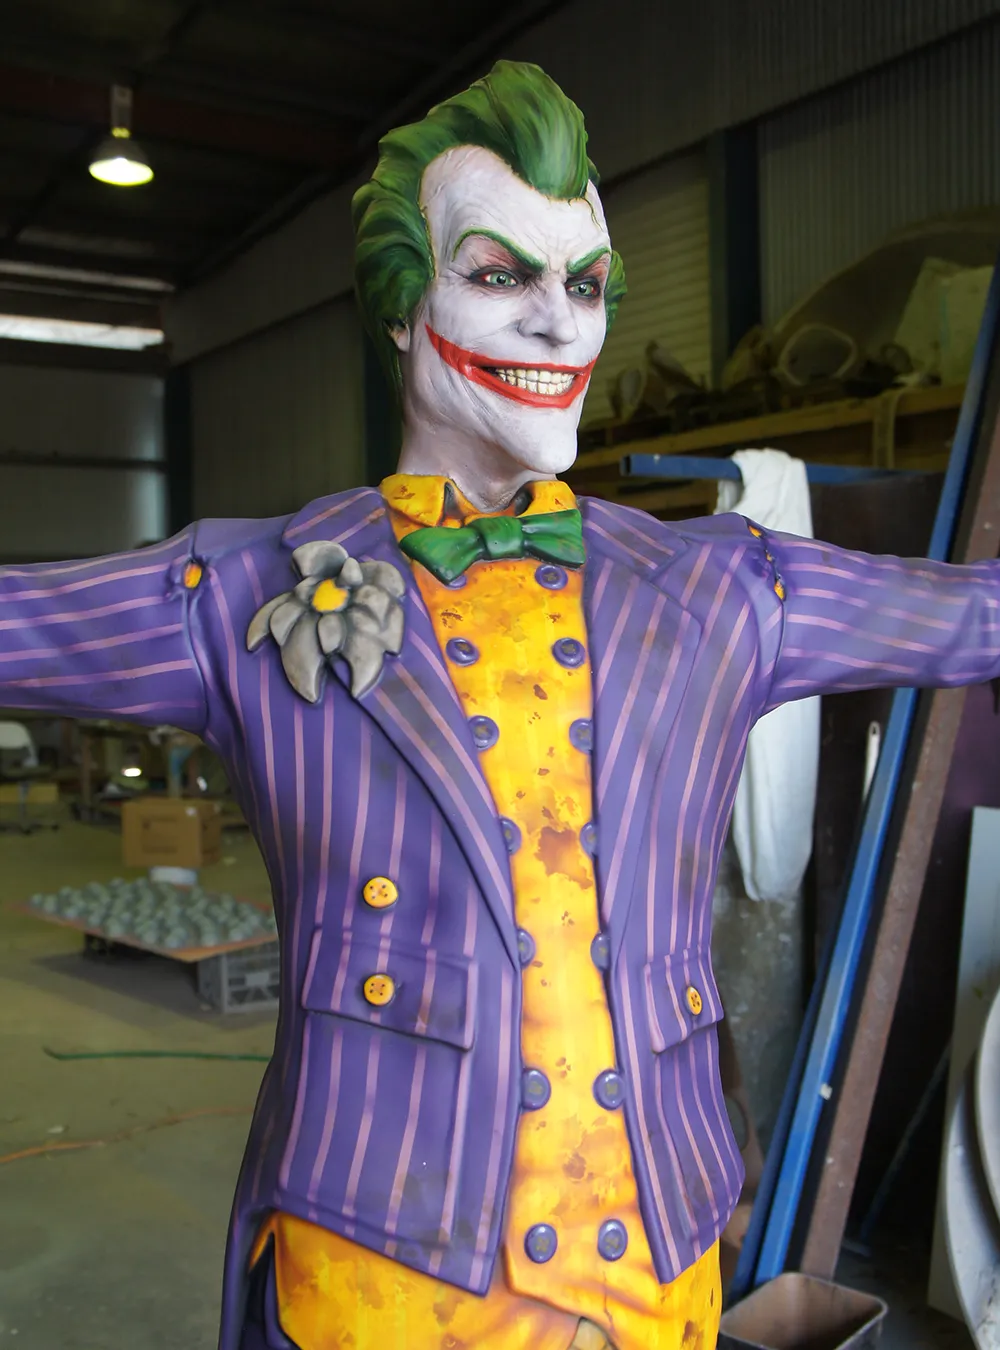 The Joker: This representation of The Joker, Batman's notorious nemesis, is chilling and incredibly detailed. The expression, complete with the character's signature maniacal grin, is spot-on.